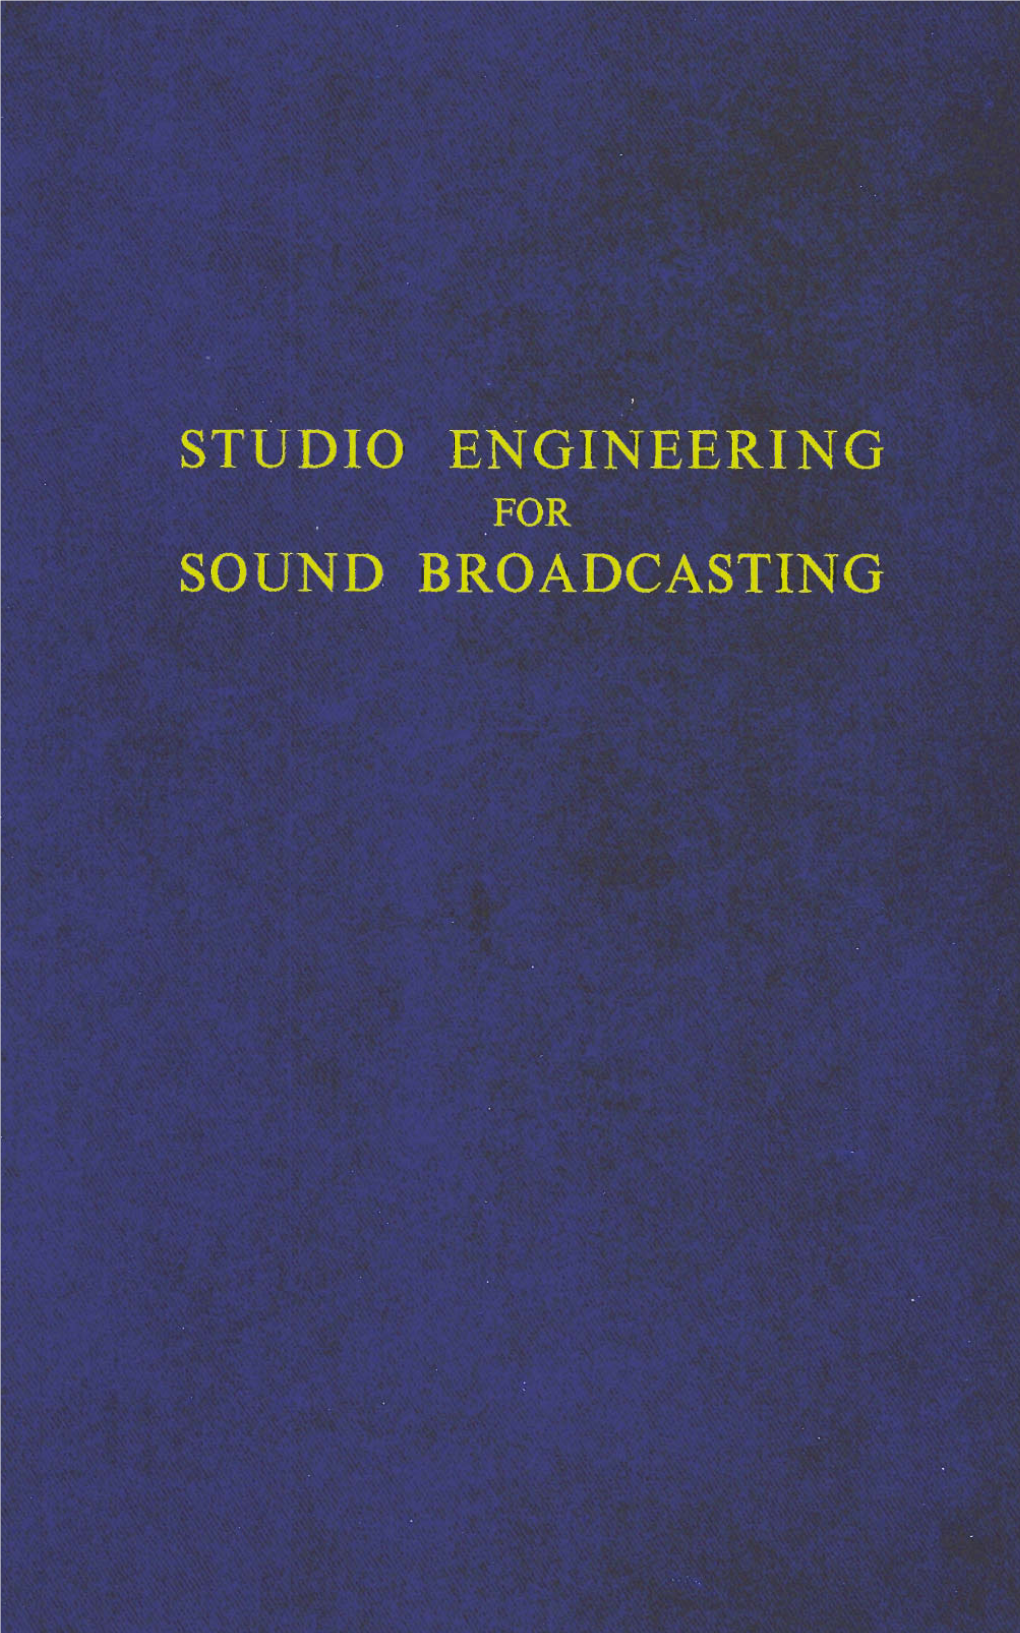 Studio Engineering for Sound Broadcasting in This Series